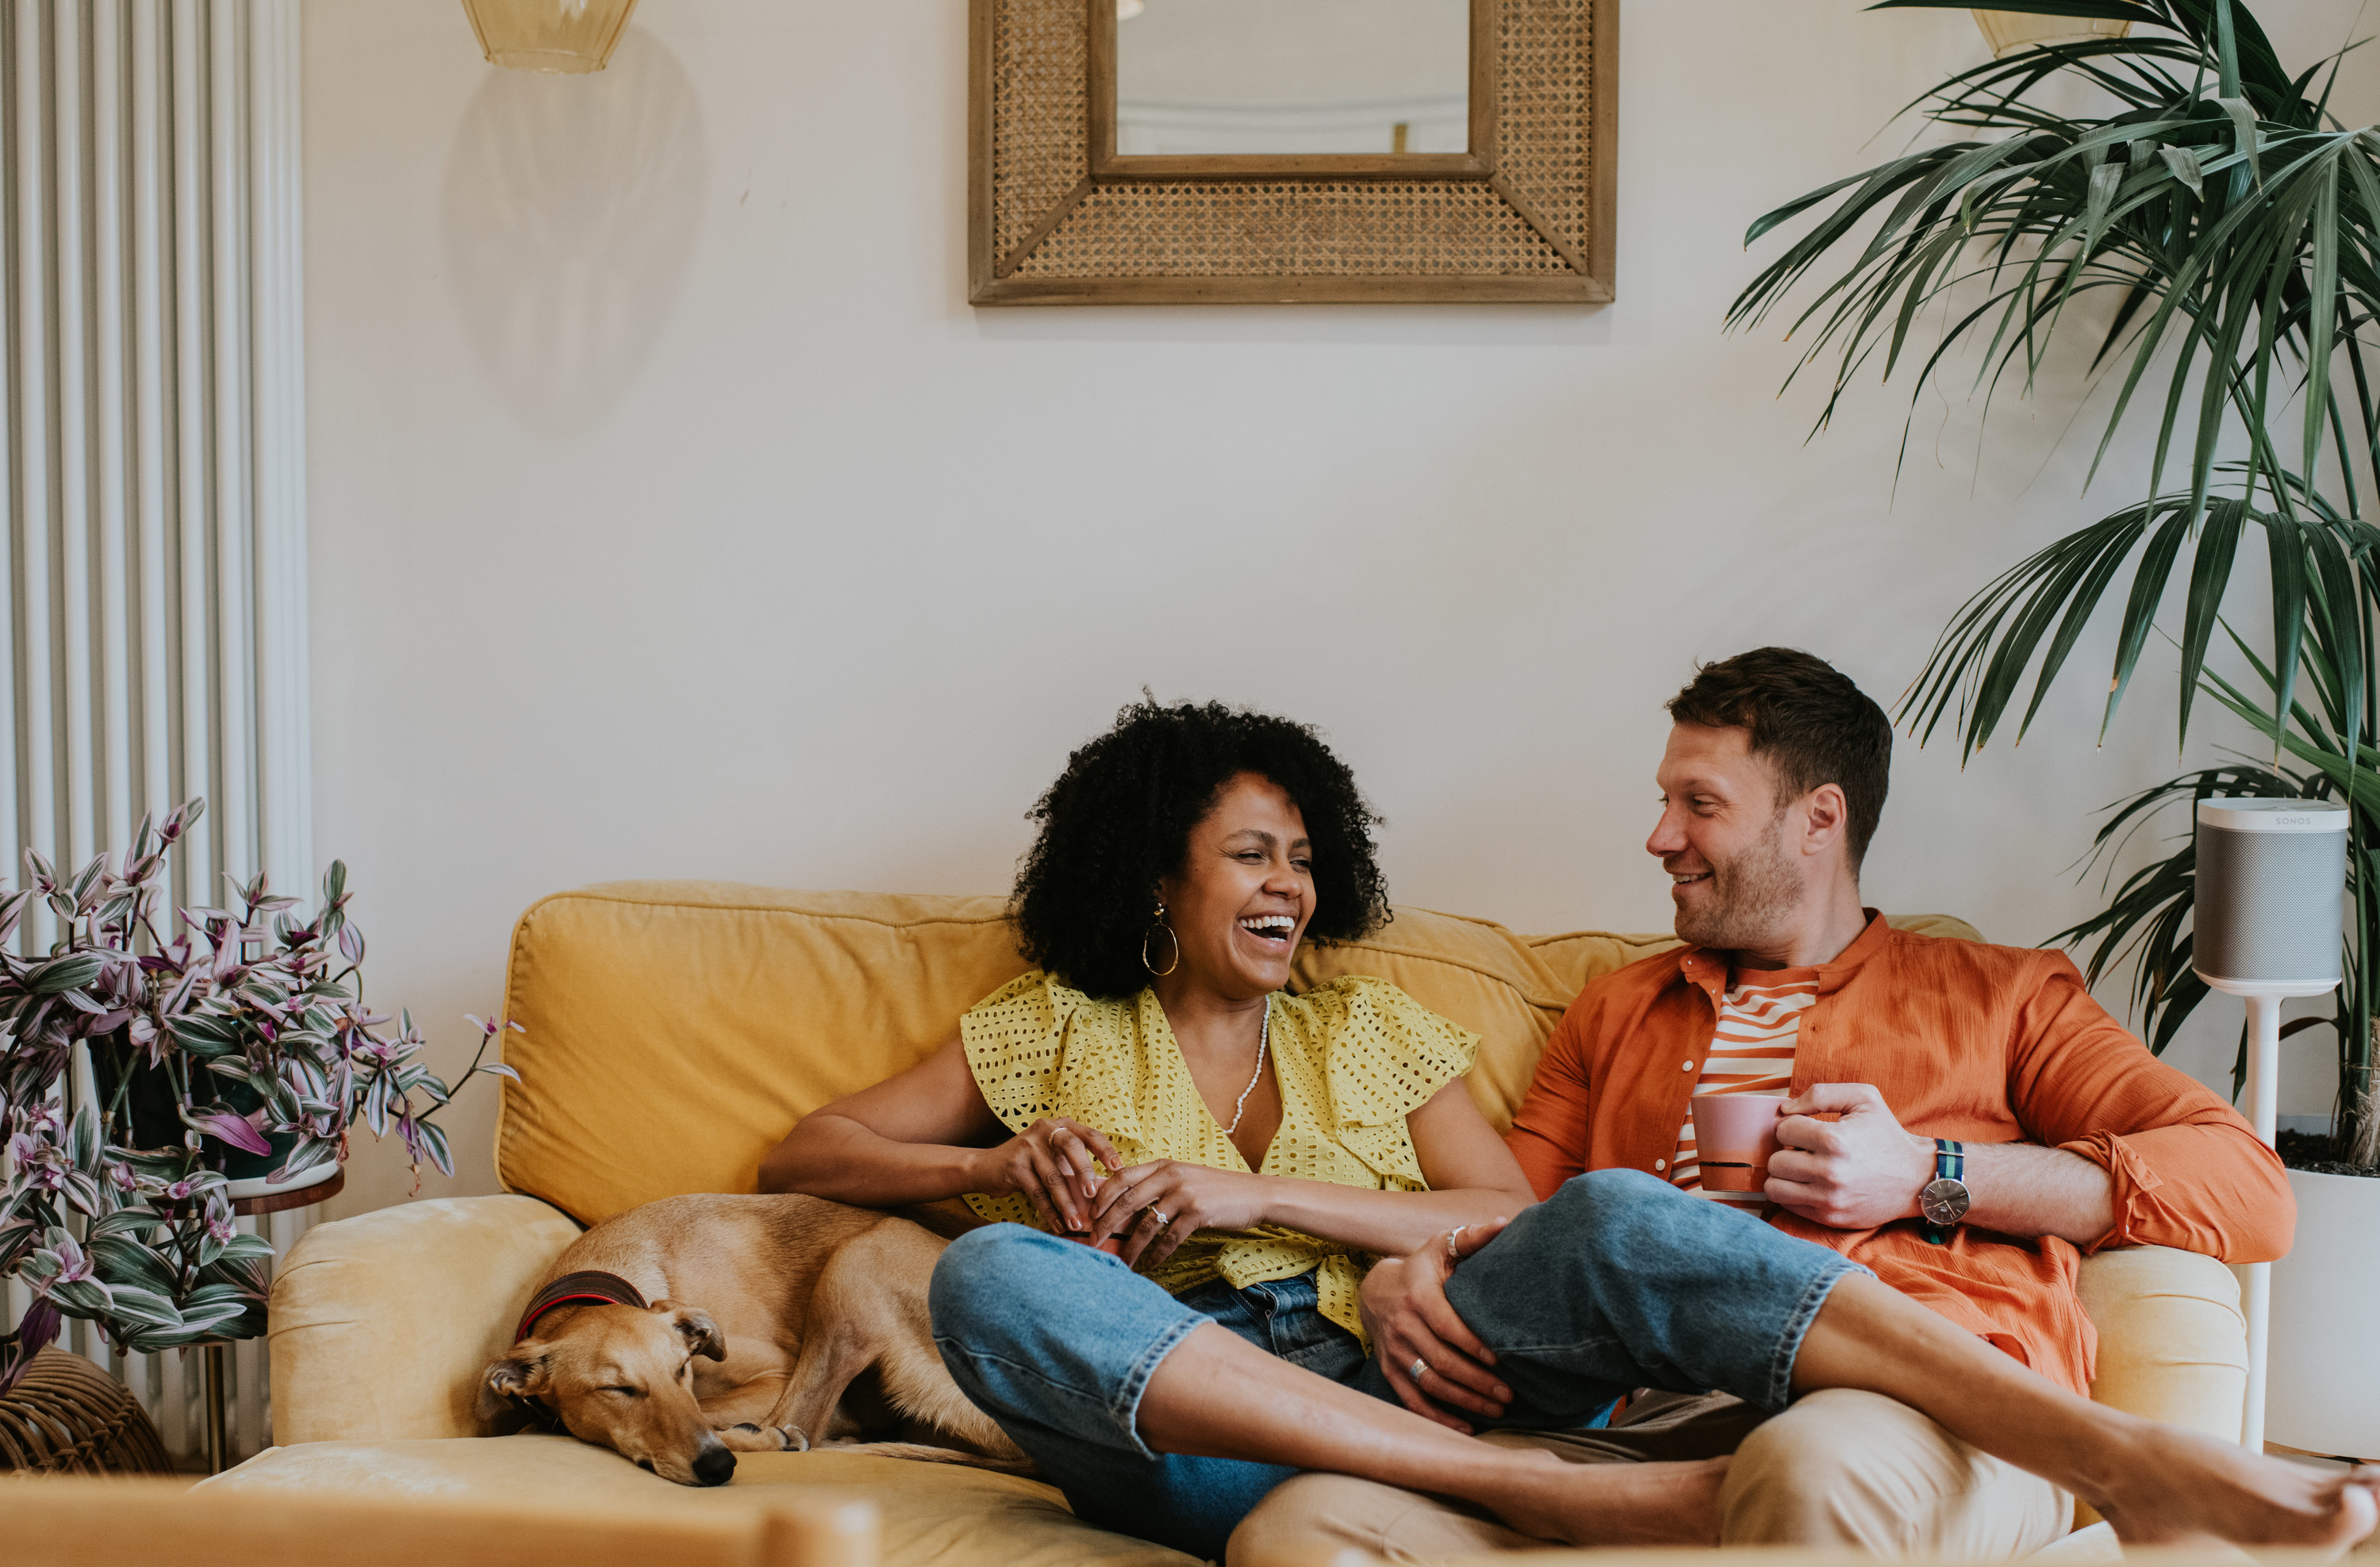 A smiling couple on the couch with their dog